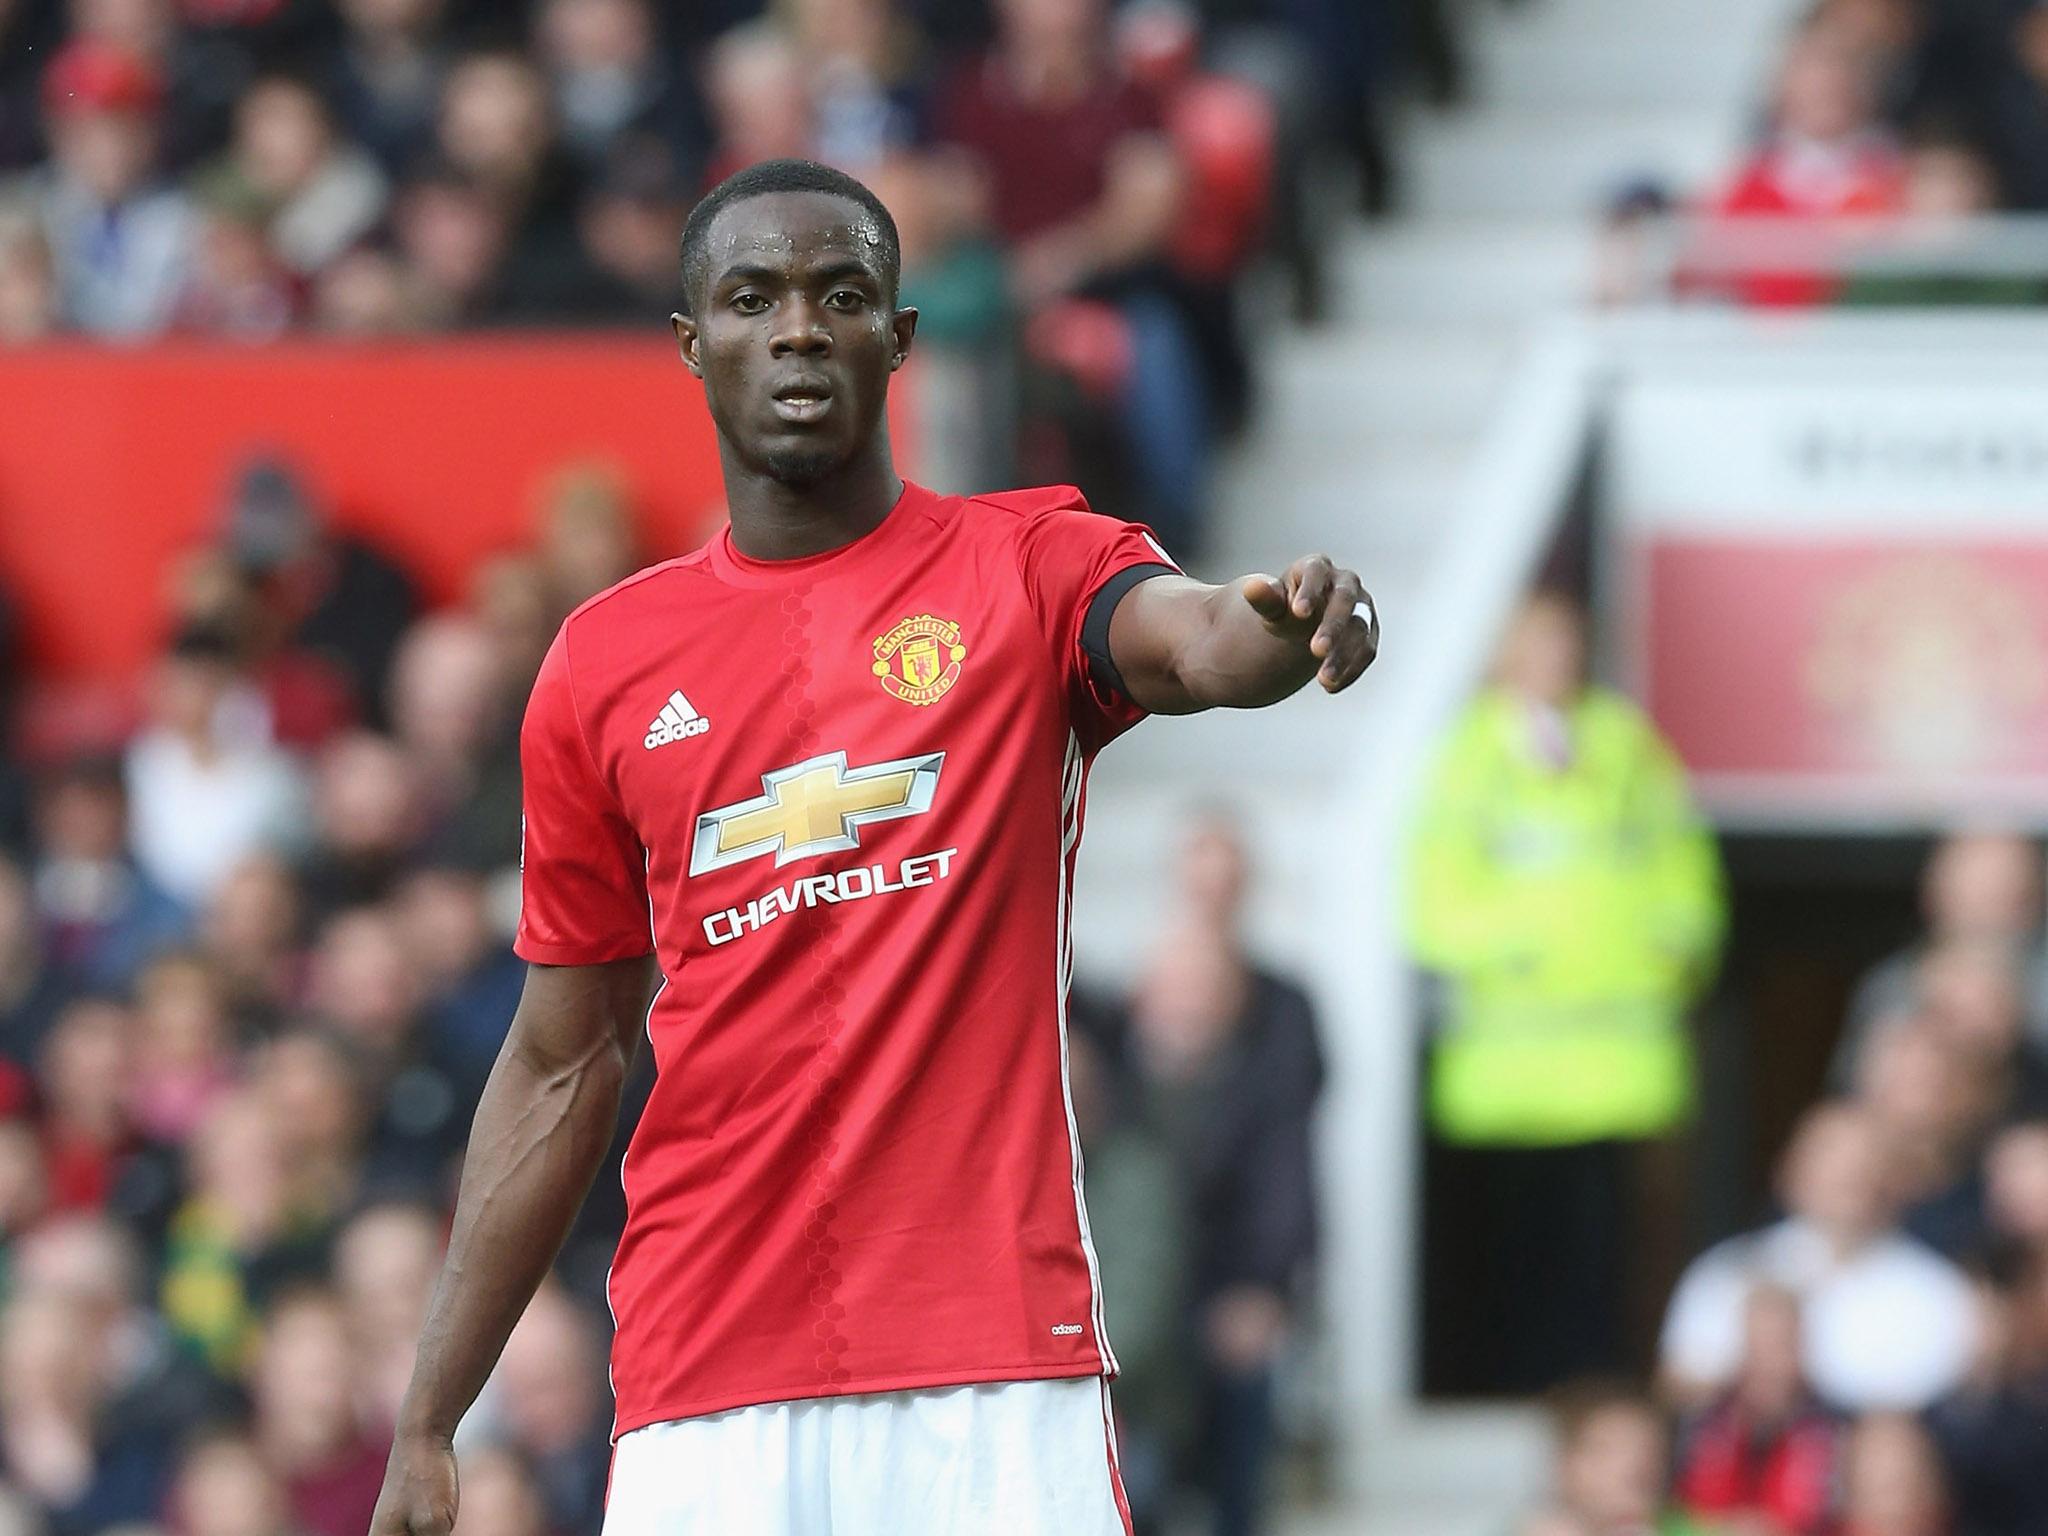 Bailly has impressed in his debut season at Old Trafford